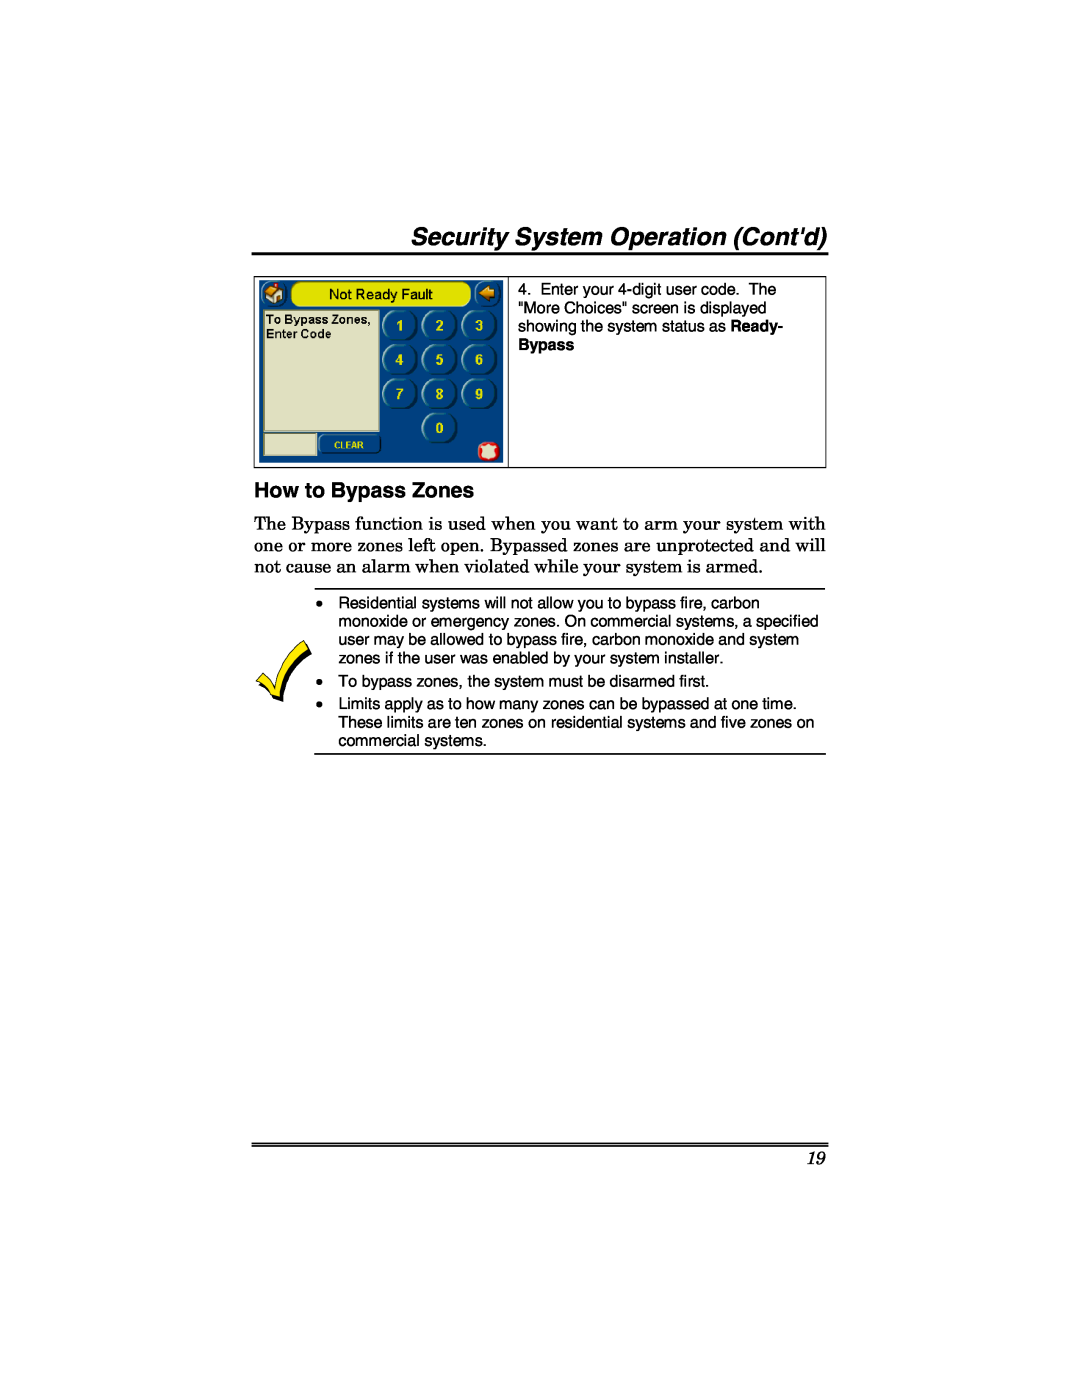 Honeywell 6271 manual How to Bypass Zones, Security System Operation Contd 